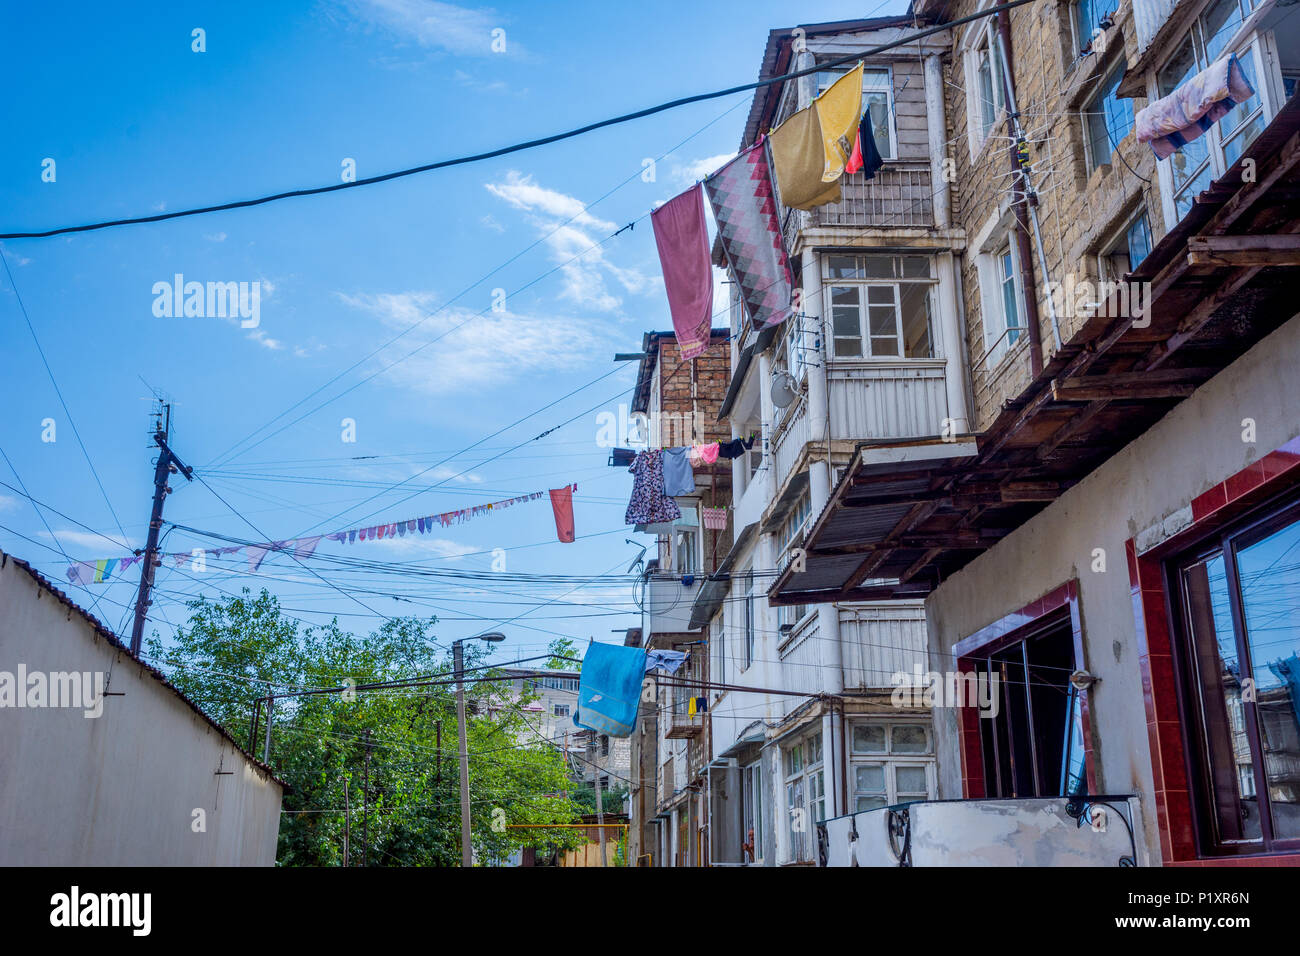 Laundry drying outside attached on the rope from the apartment building in Stepanakert, Nagorno Karabakh, Artsakh republic Stock Photo